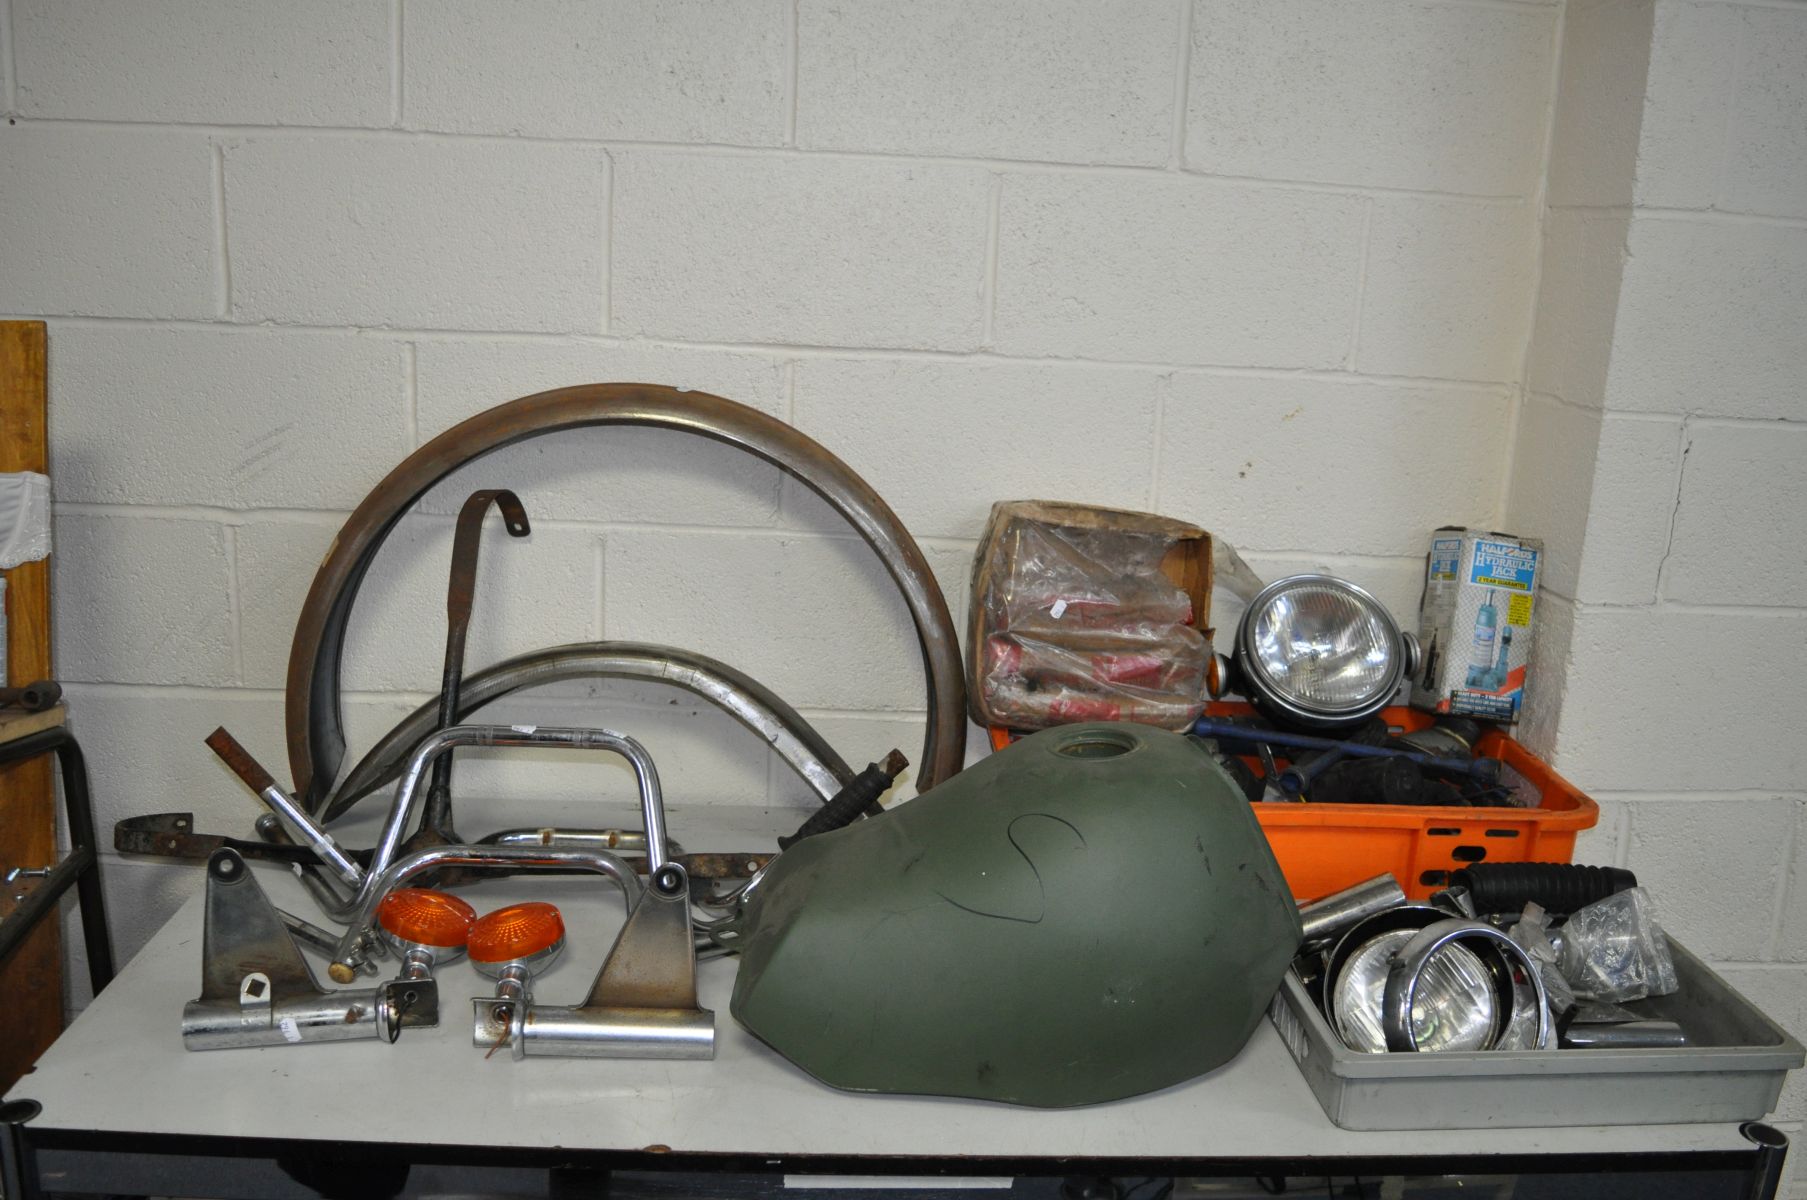 TWO TRAYS CONTAINING VINTAGE AUTOMOTIVE PARTS, including a motorbike fuel tank, mud guards, handle